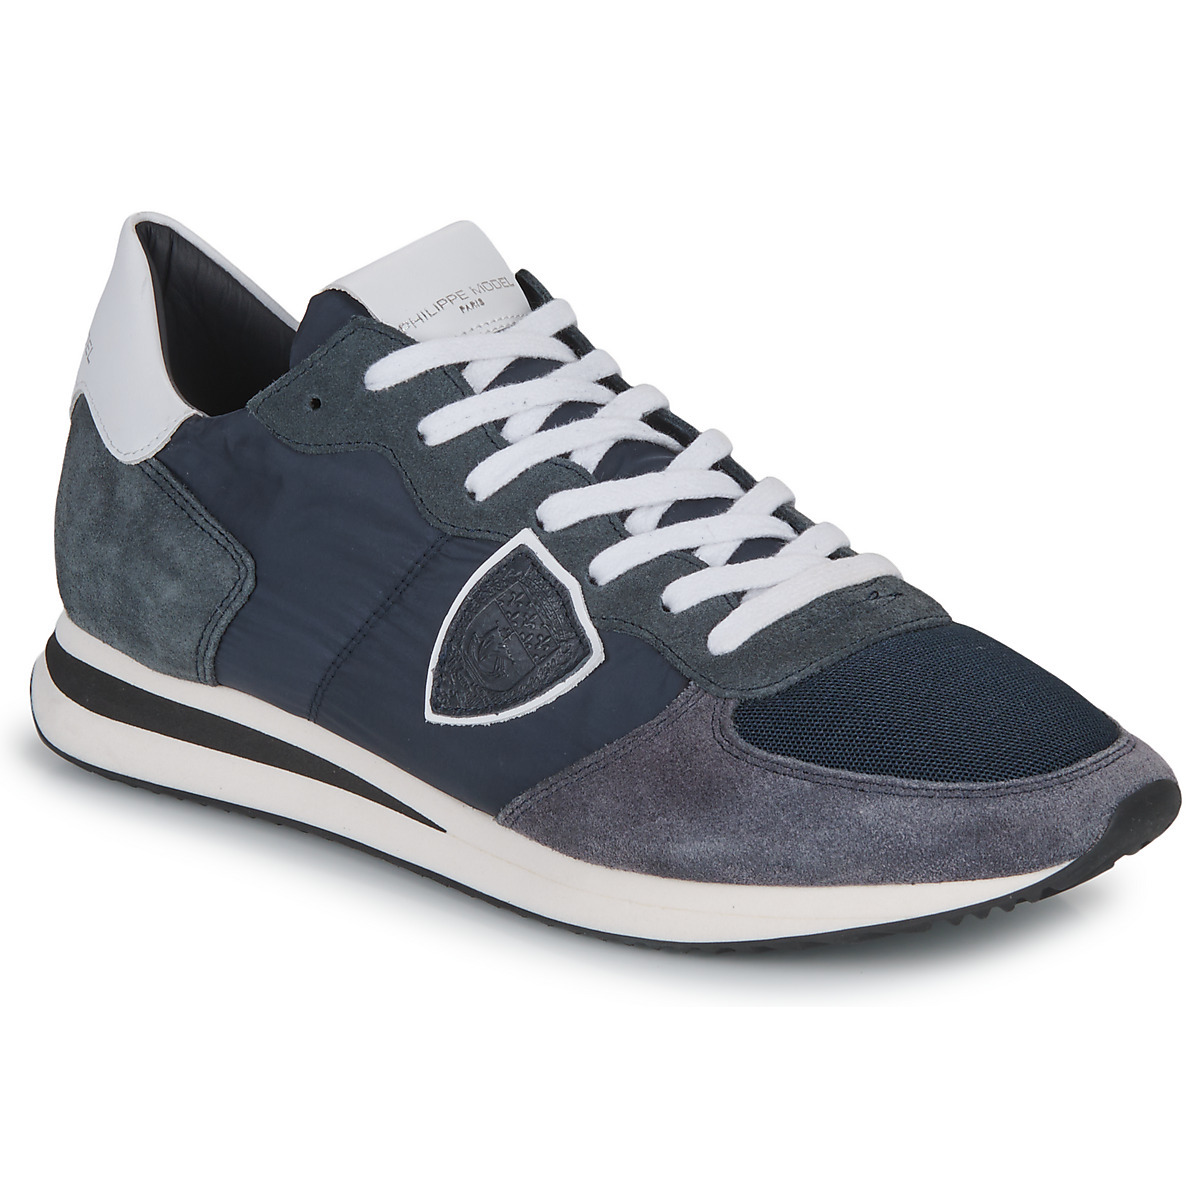 Philippe Model - Men's Blue Sneakers at Spartoo GOOFASH